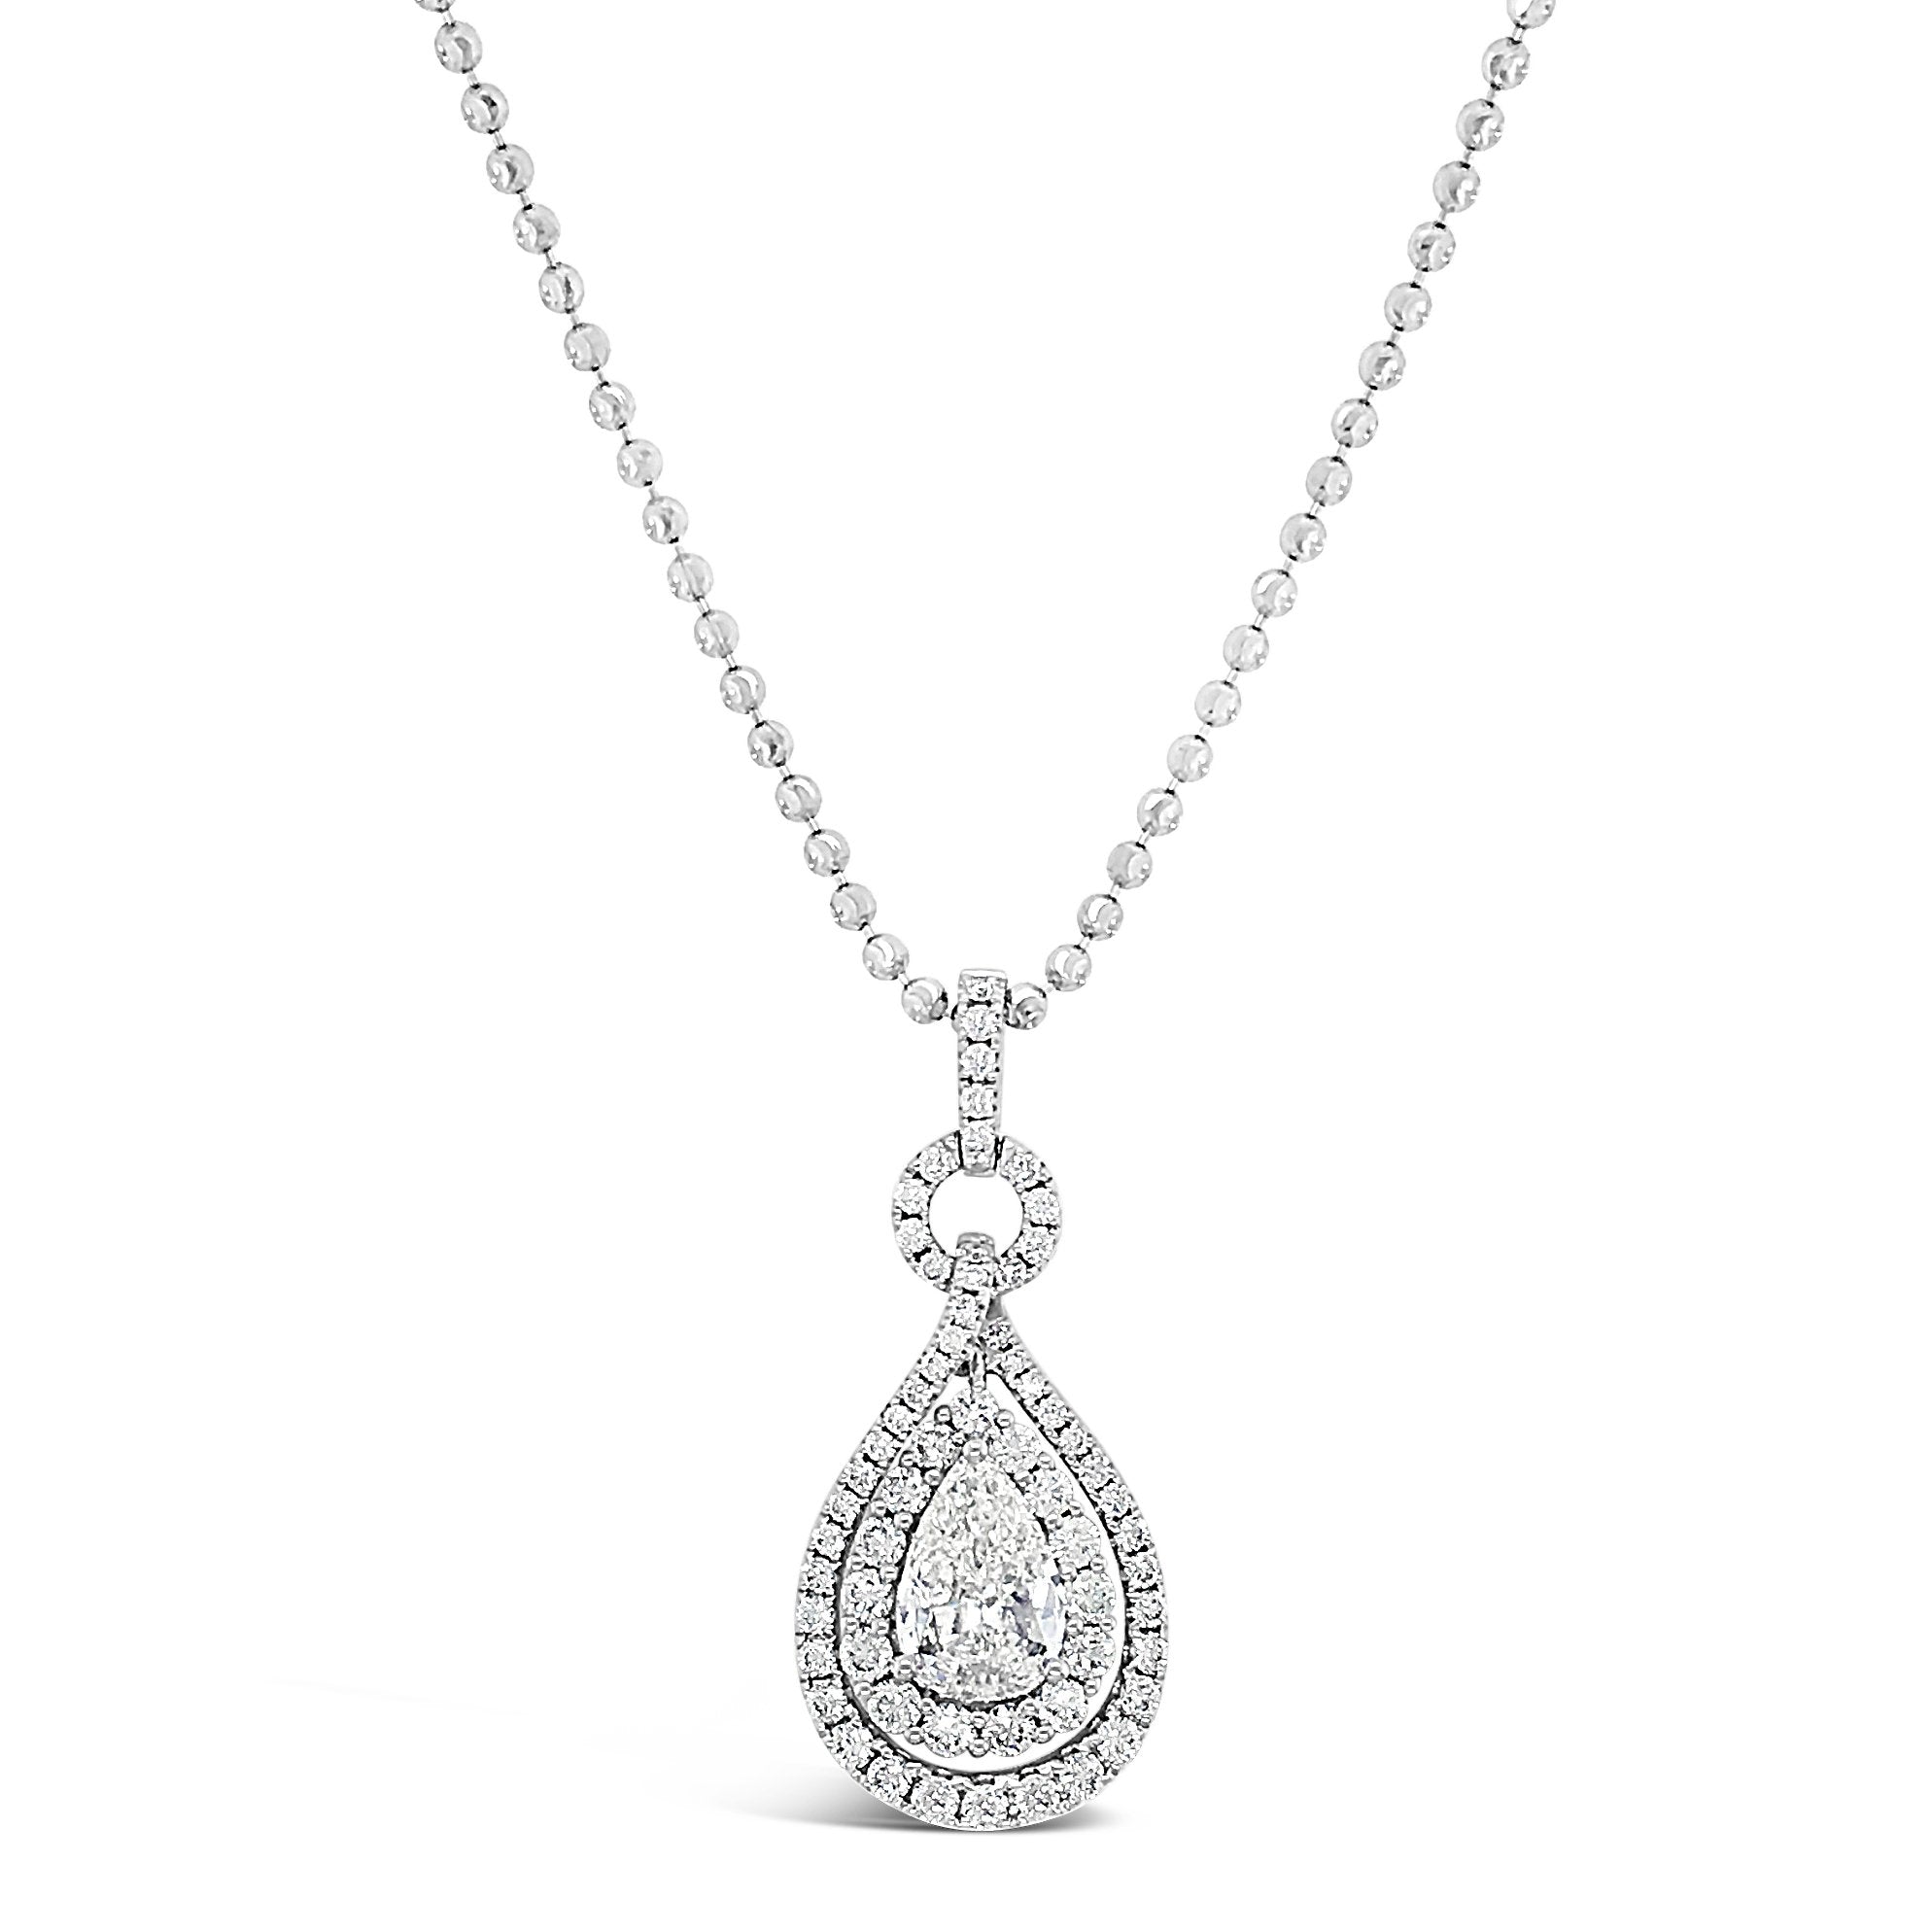 Pear-Shaped Diamond Pendant Necklace  -18K gold weighing 3.29 grams  -64 round diamonds totaling 1.01 carats  -1.10 carat pear-shaped diamond (GIA-graded K-color, VS2 clarity)